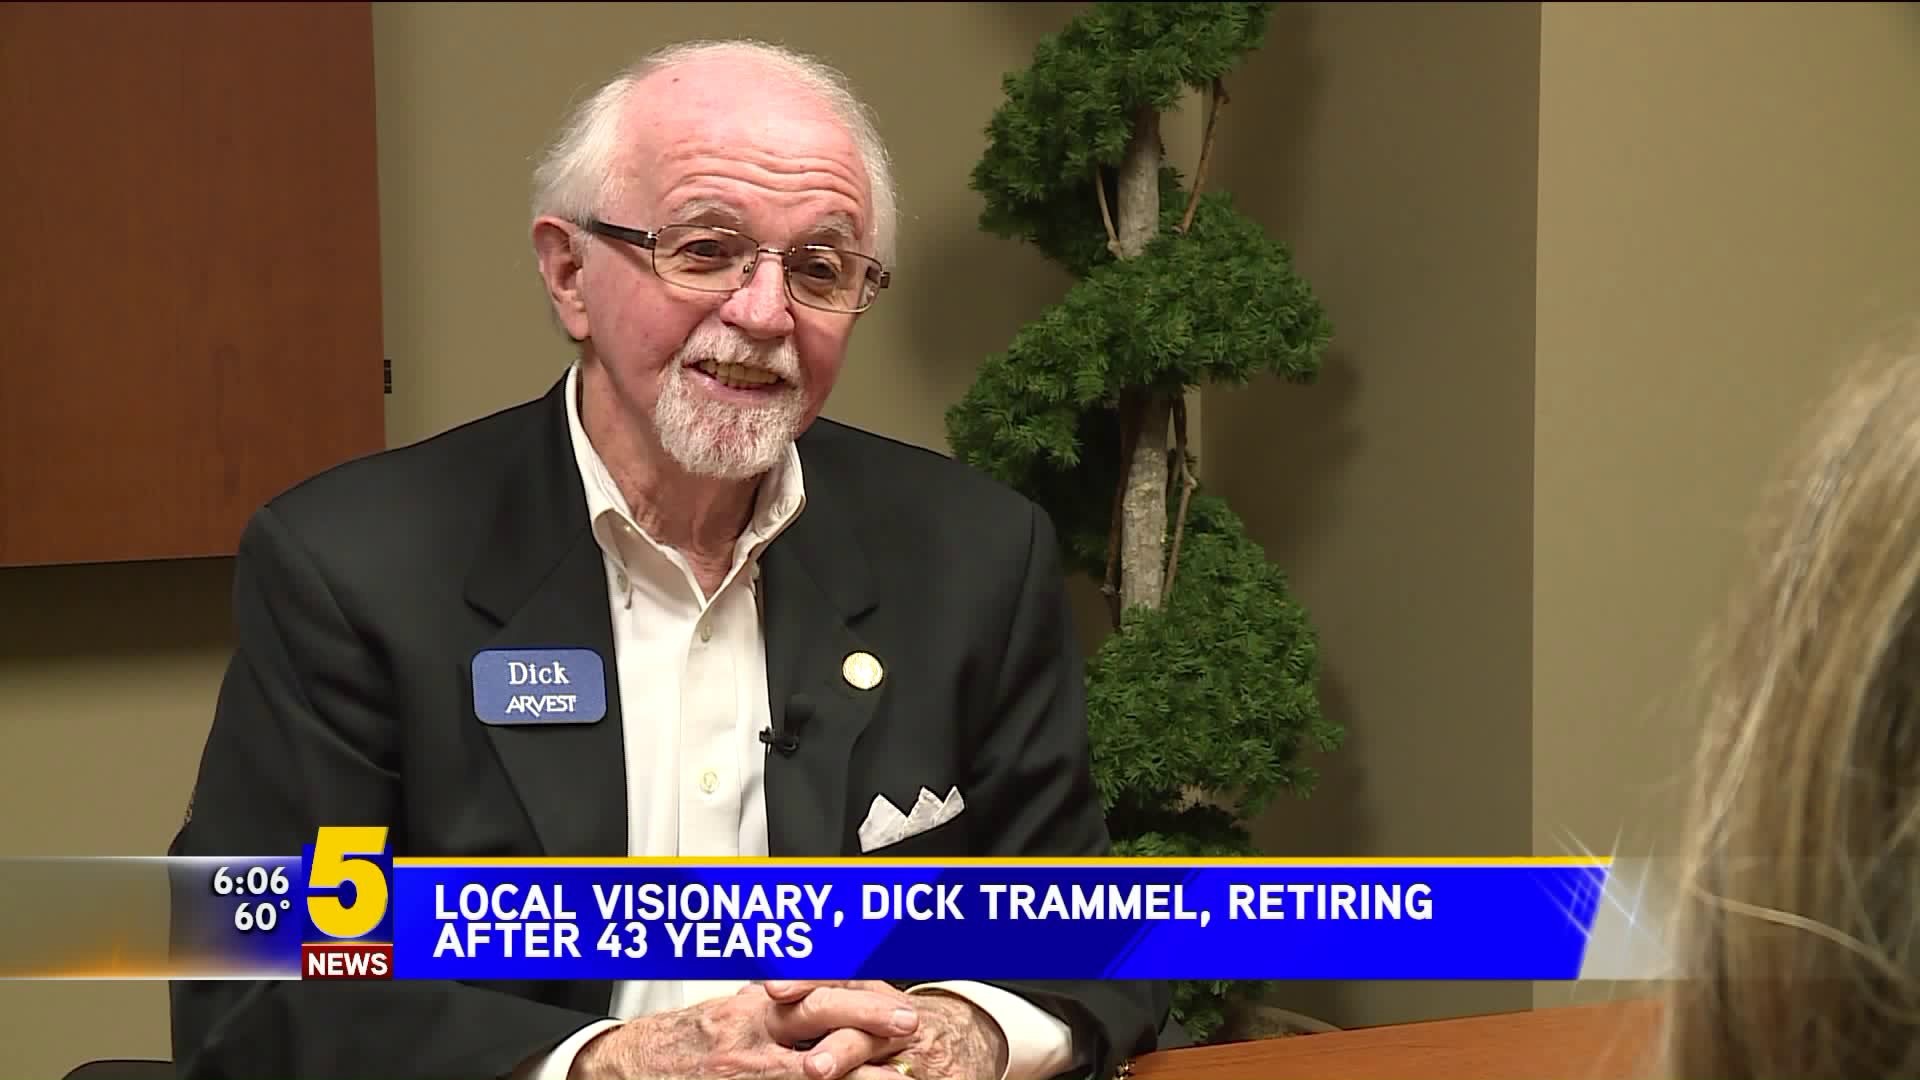 Local Visonary Retiring After 43 Years